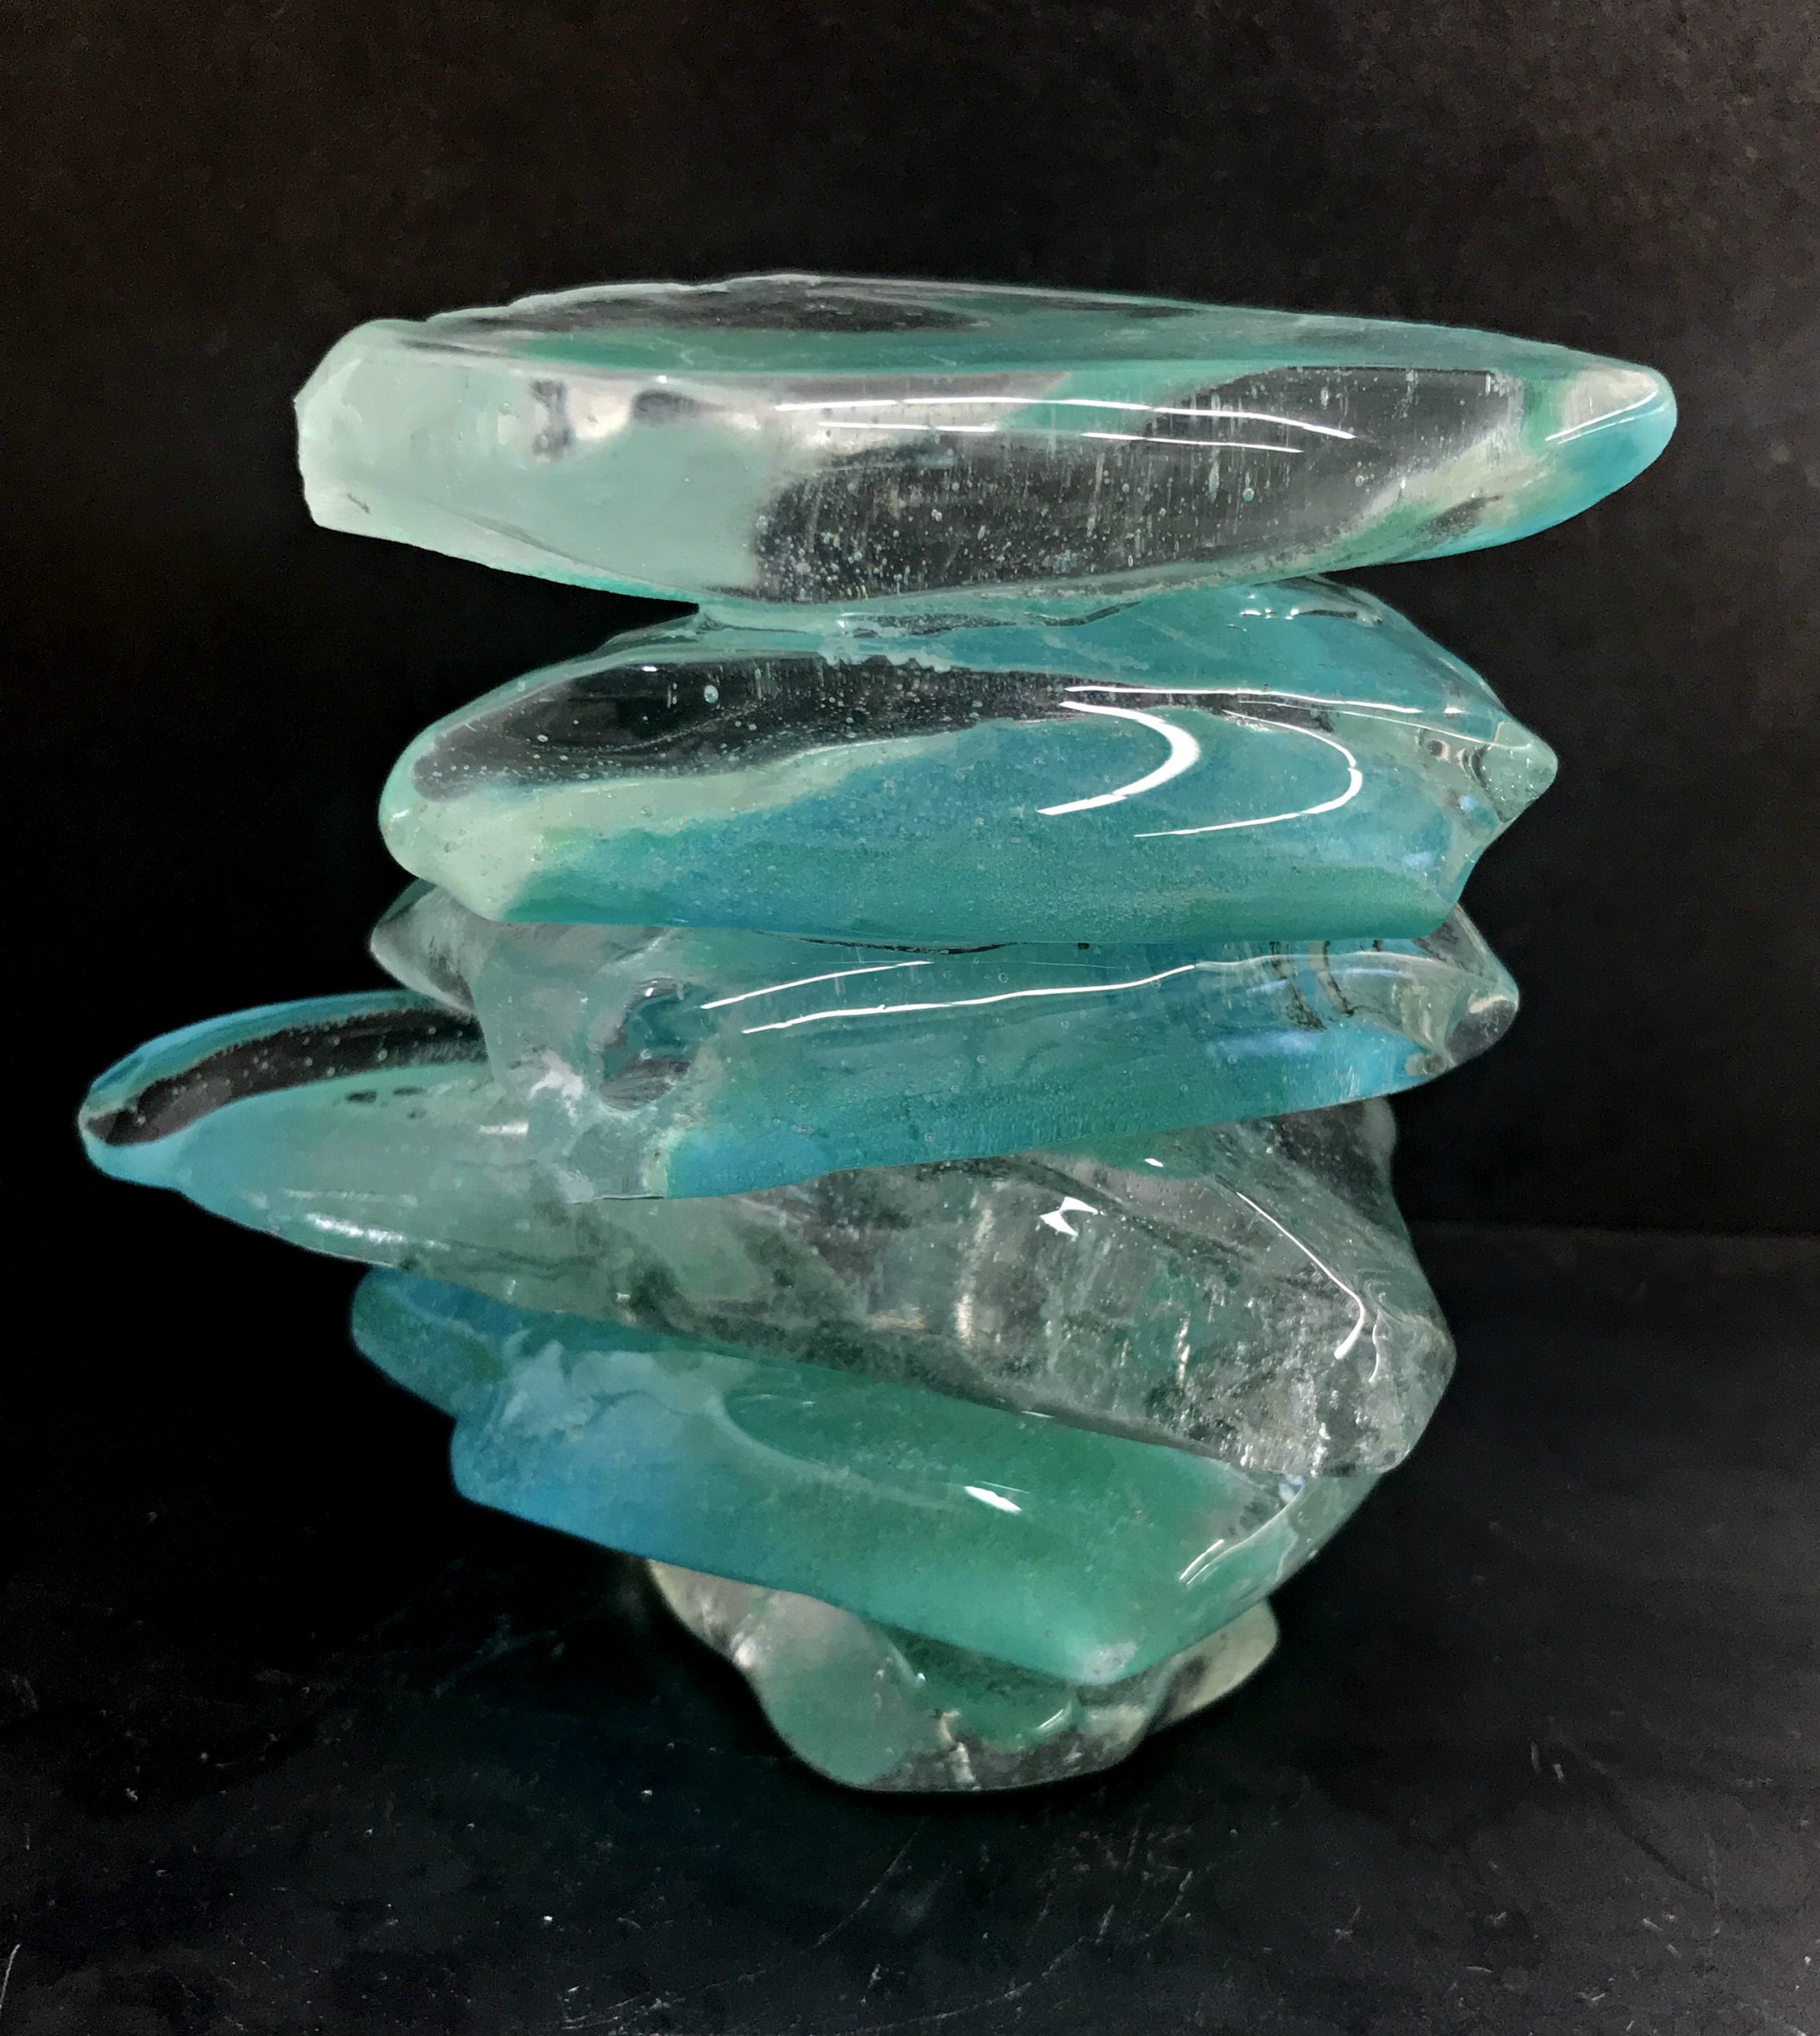 Rocky Mountain Cairn 13, cast glass sculpture by Heather Cuell | Effusion Art Gallery + Cast Glass Studio, Invermere BC